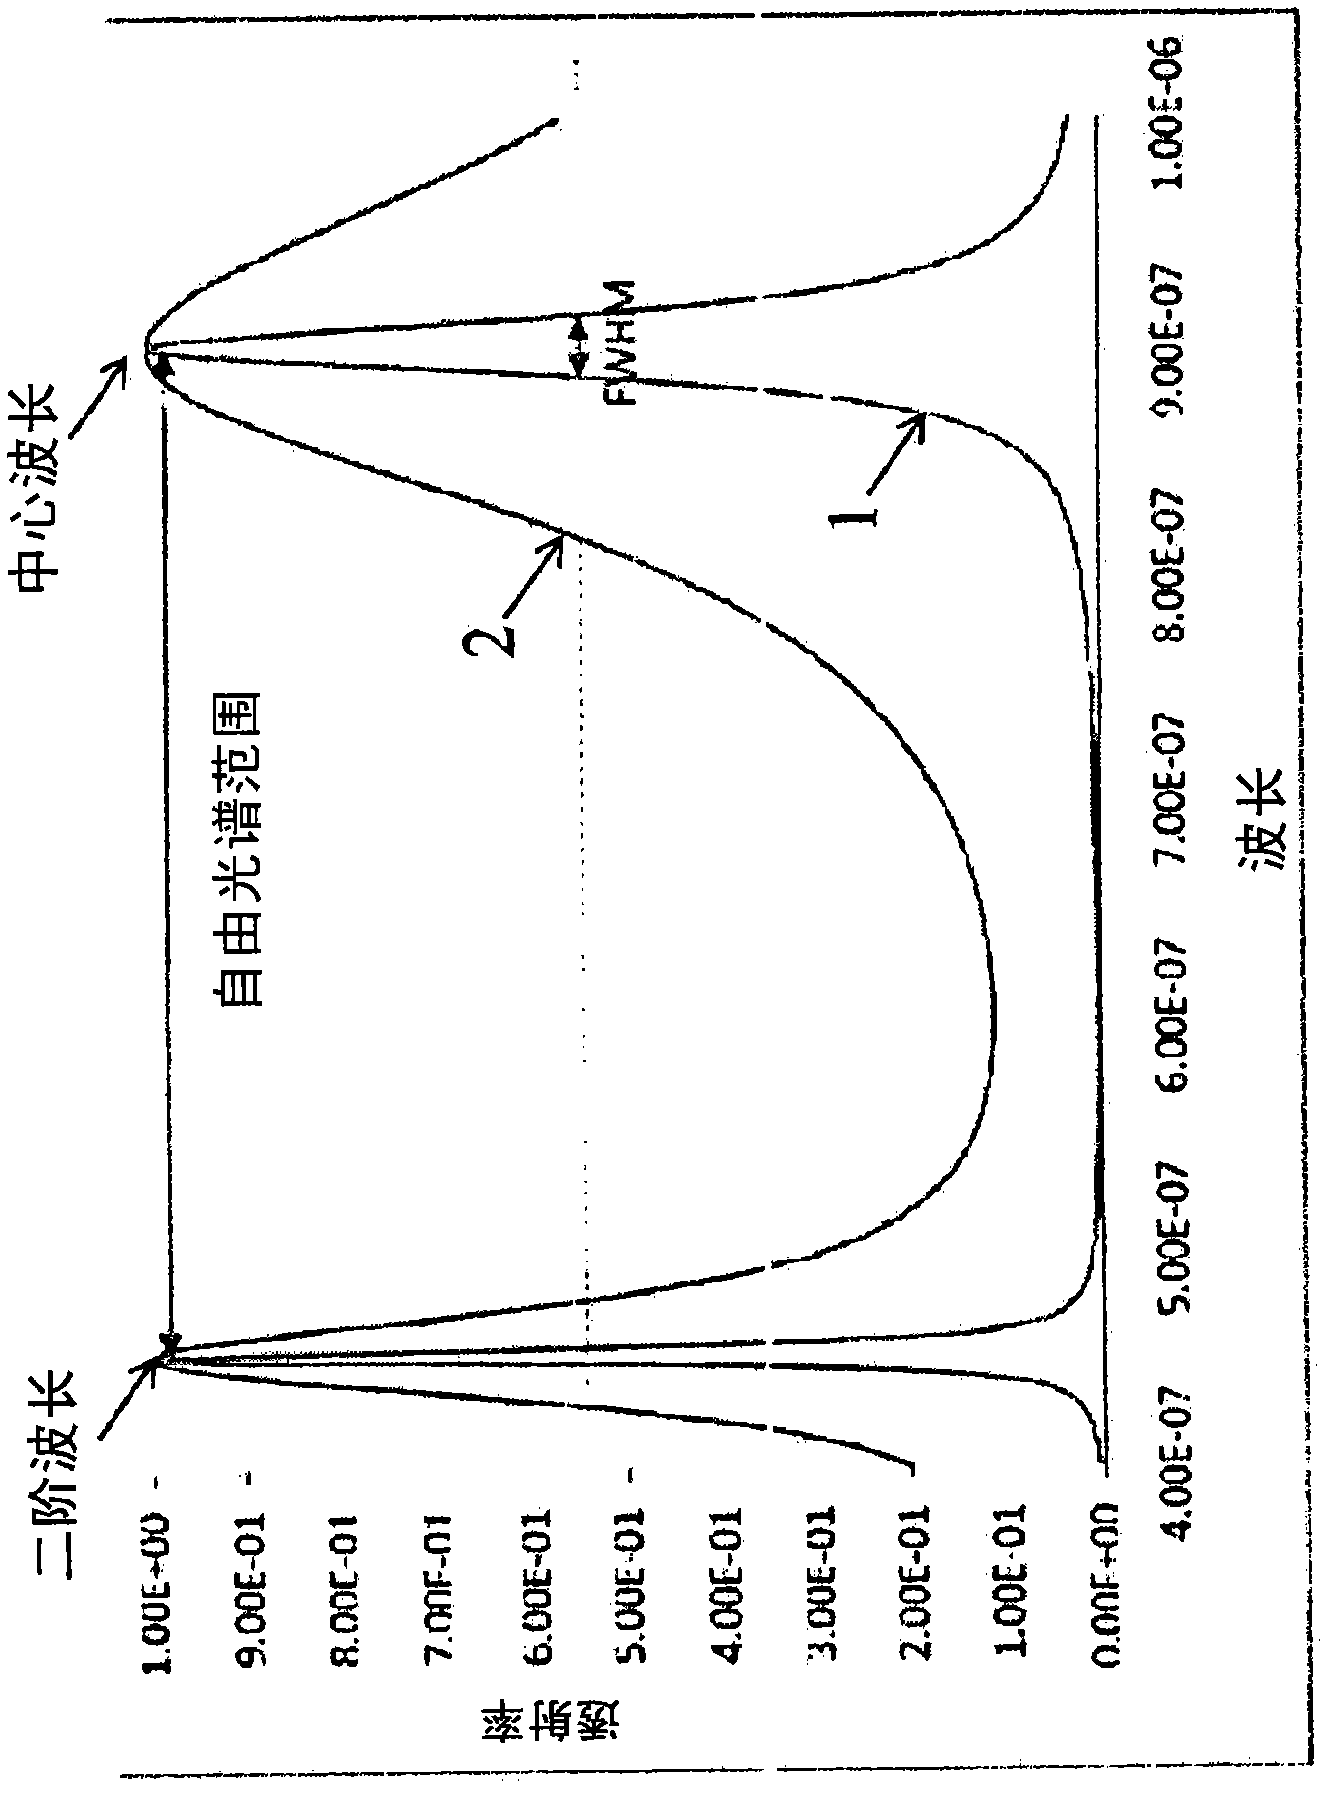 Integrated circuit for spectral imaging system